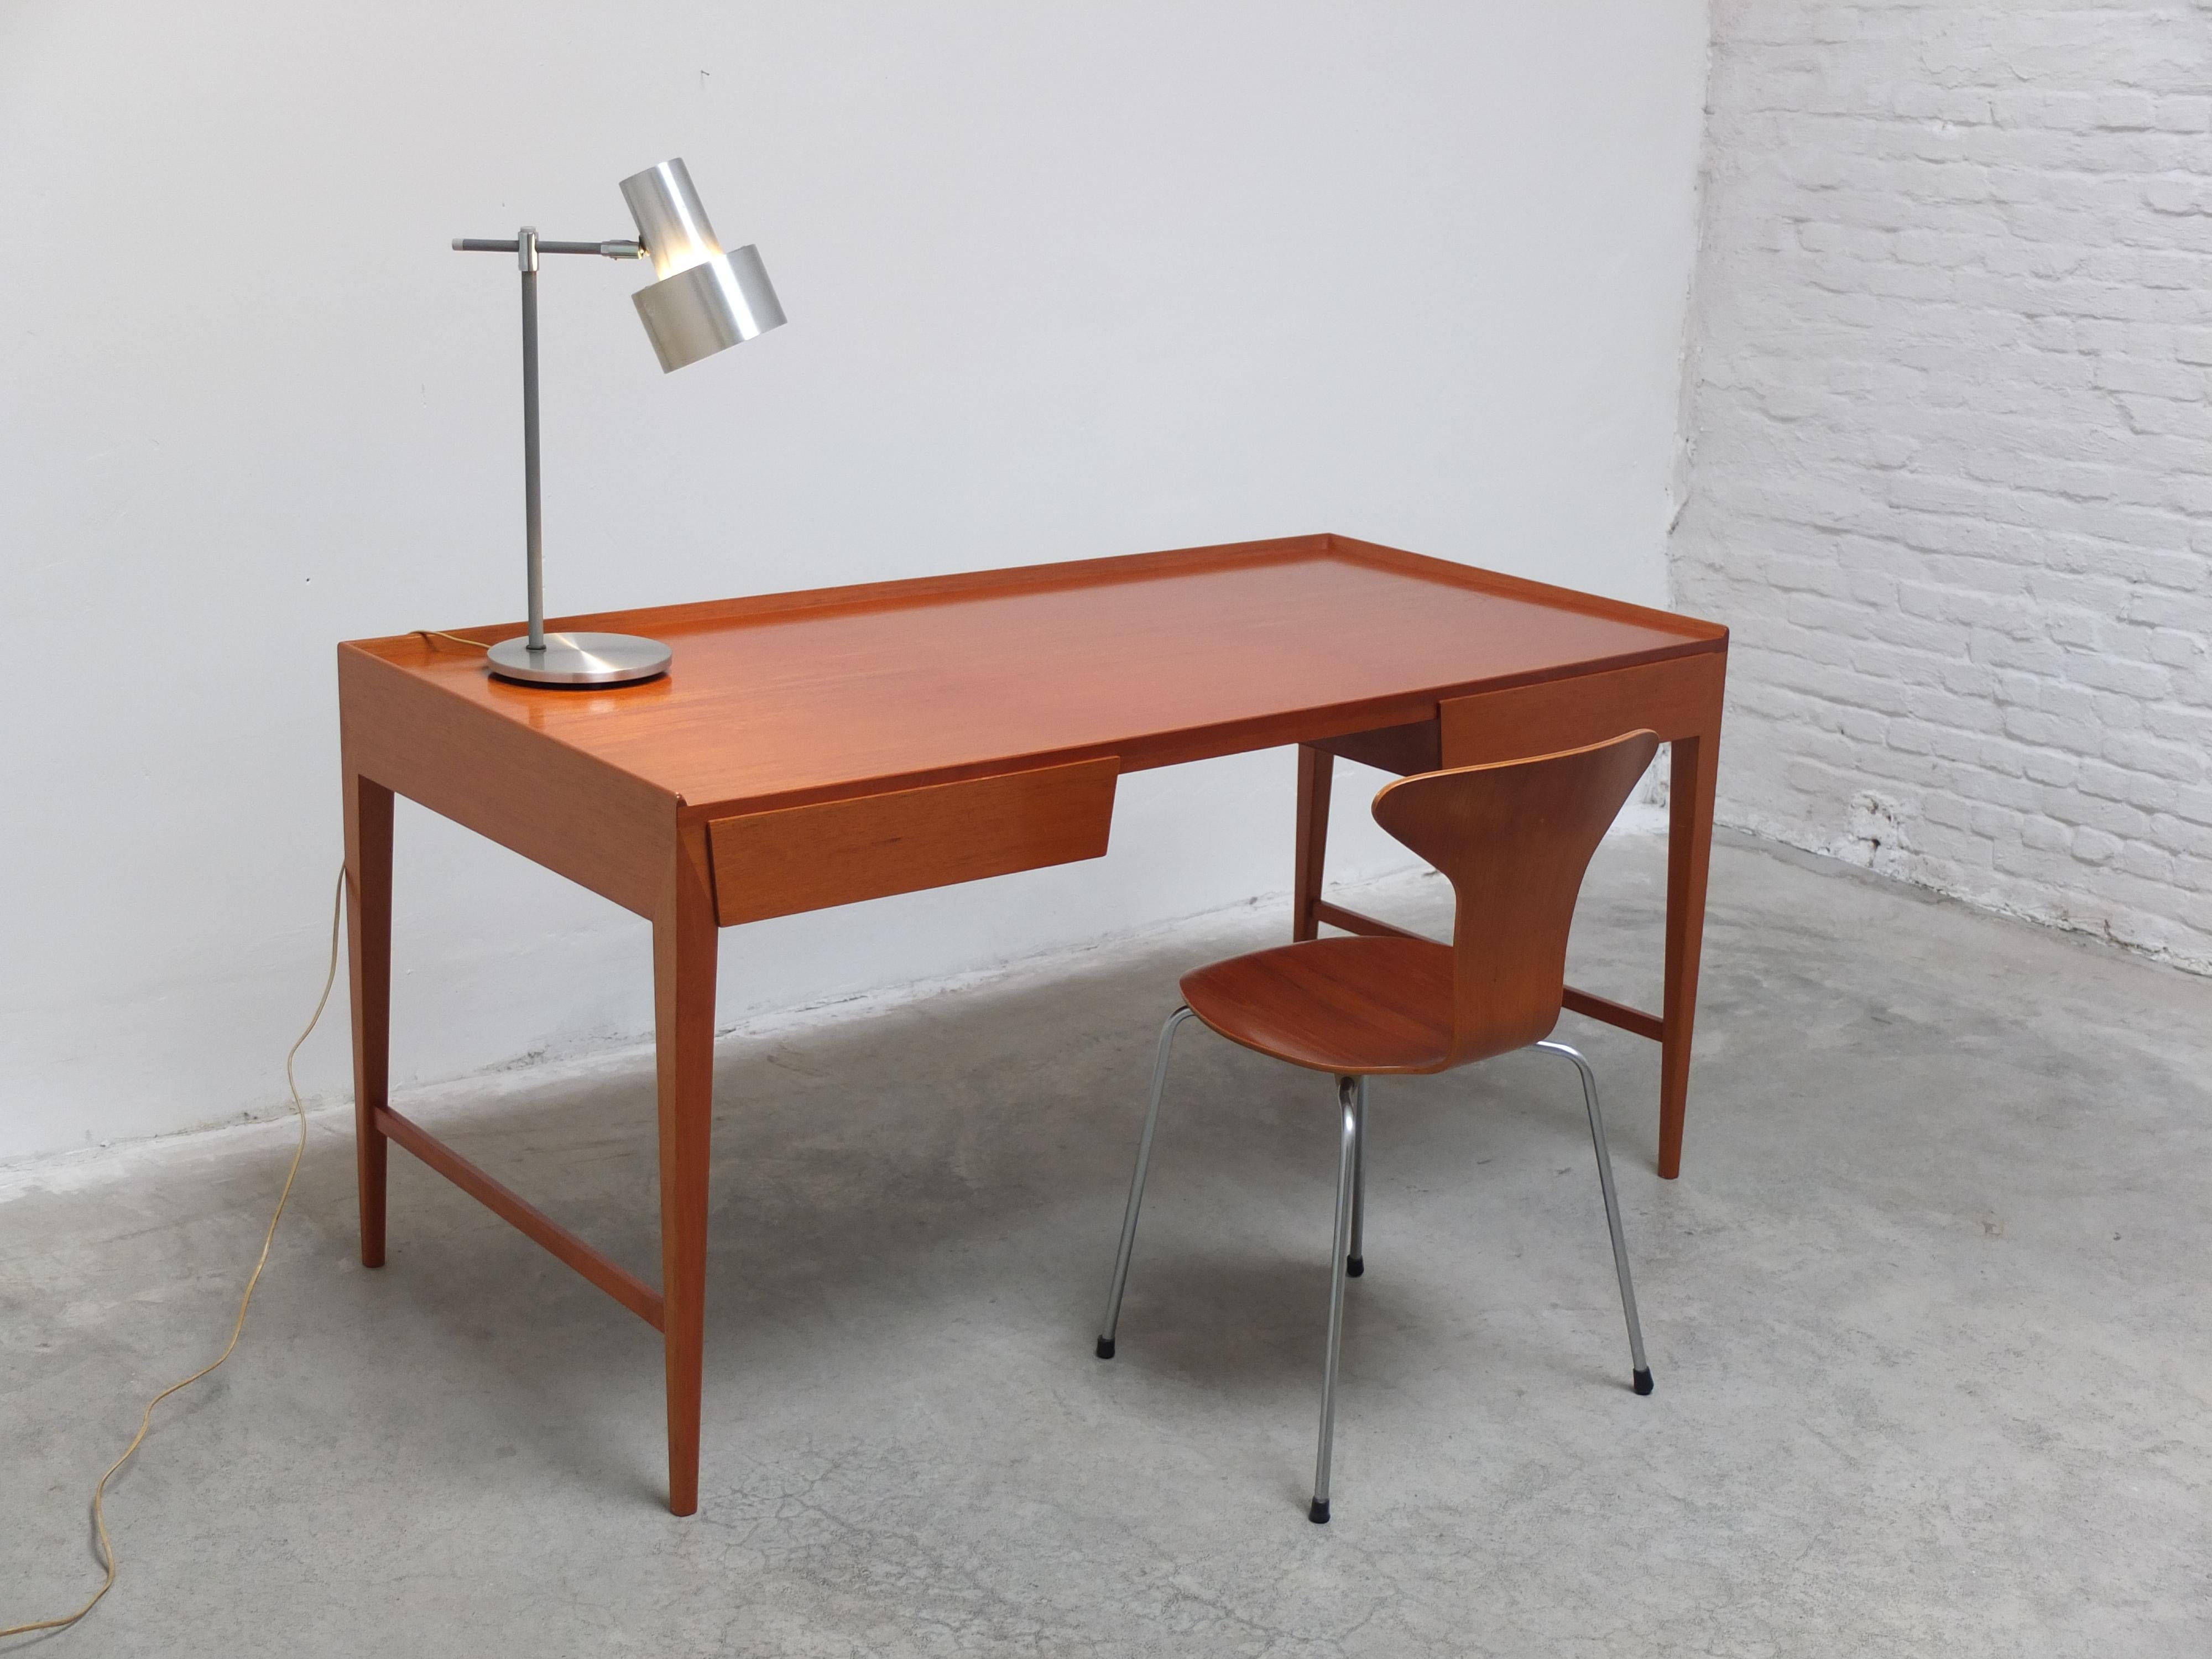 Rare Freestanding Desk by Frode Holm for Illums Bollighus, 1950s For Sale 8